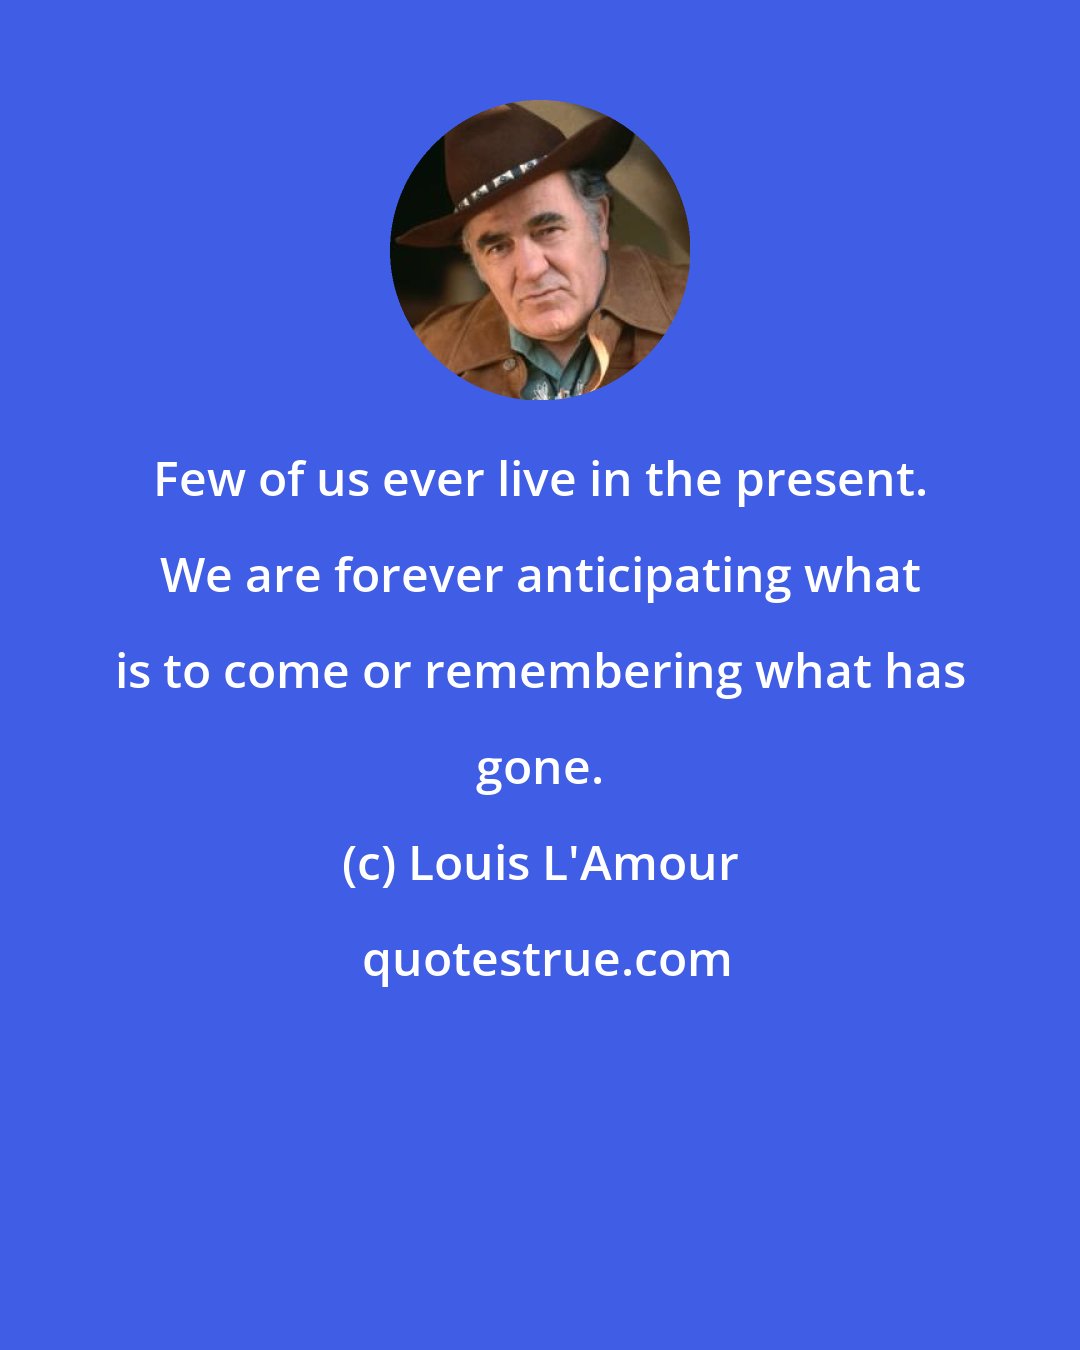 Louis L'Amour: Few of us ever live in the present. We are forever anticipating what is to come or remembering what has gone.